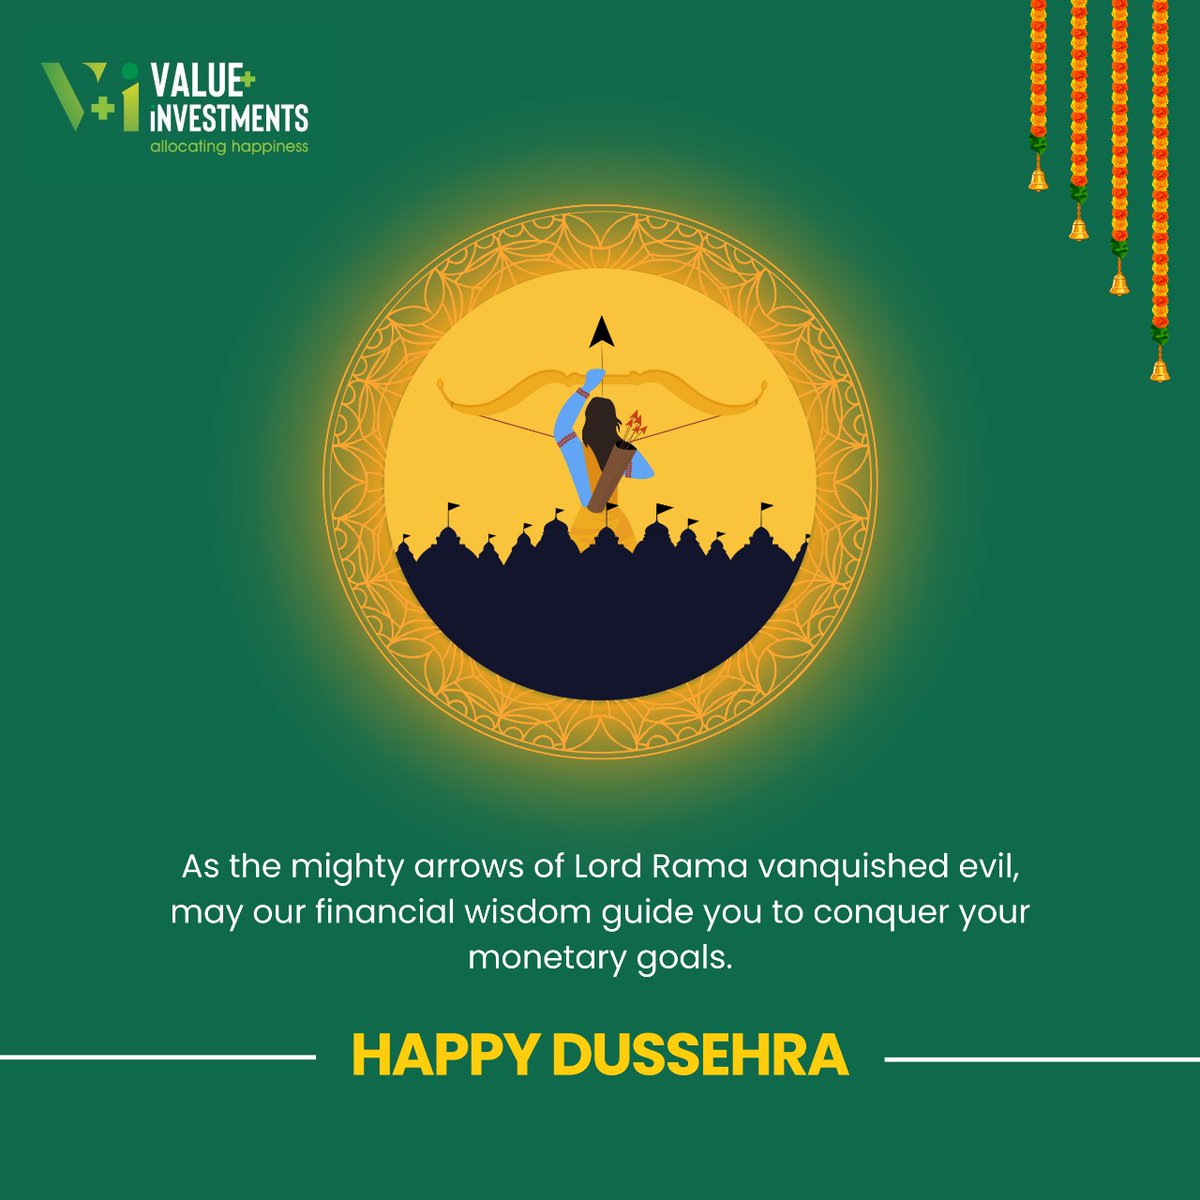 Wishing you a financially prosperous and joyous Dussehra!✨

May you conquer your financial goals with the same determination as Lord Rama. 🌟

#HappyDussehra #FinancialProsperity #FestiveFinance #ValuePlusInvestments #Dussehra2023 #WealthGoals #FinancialSuccess #InvestingWisely